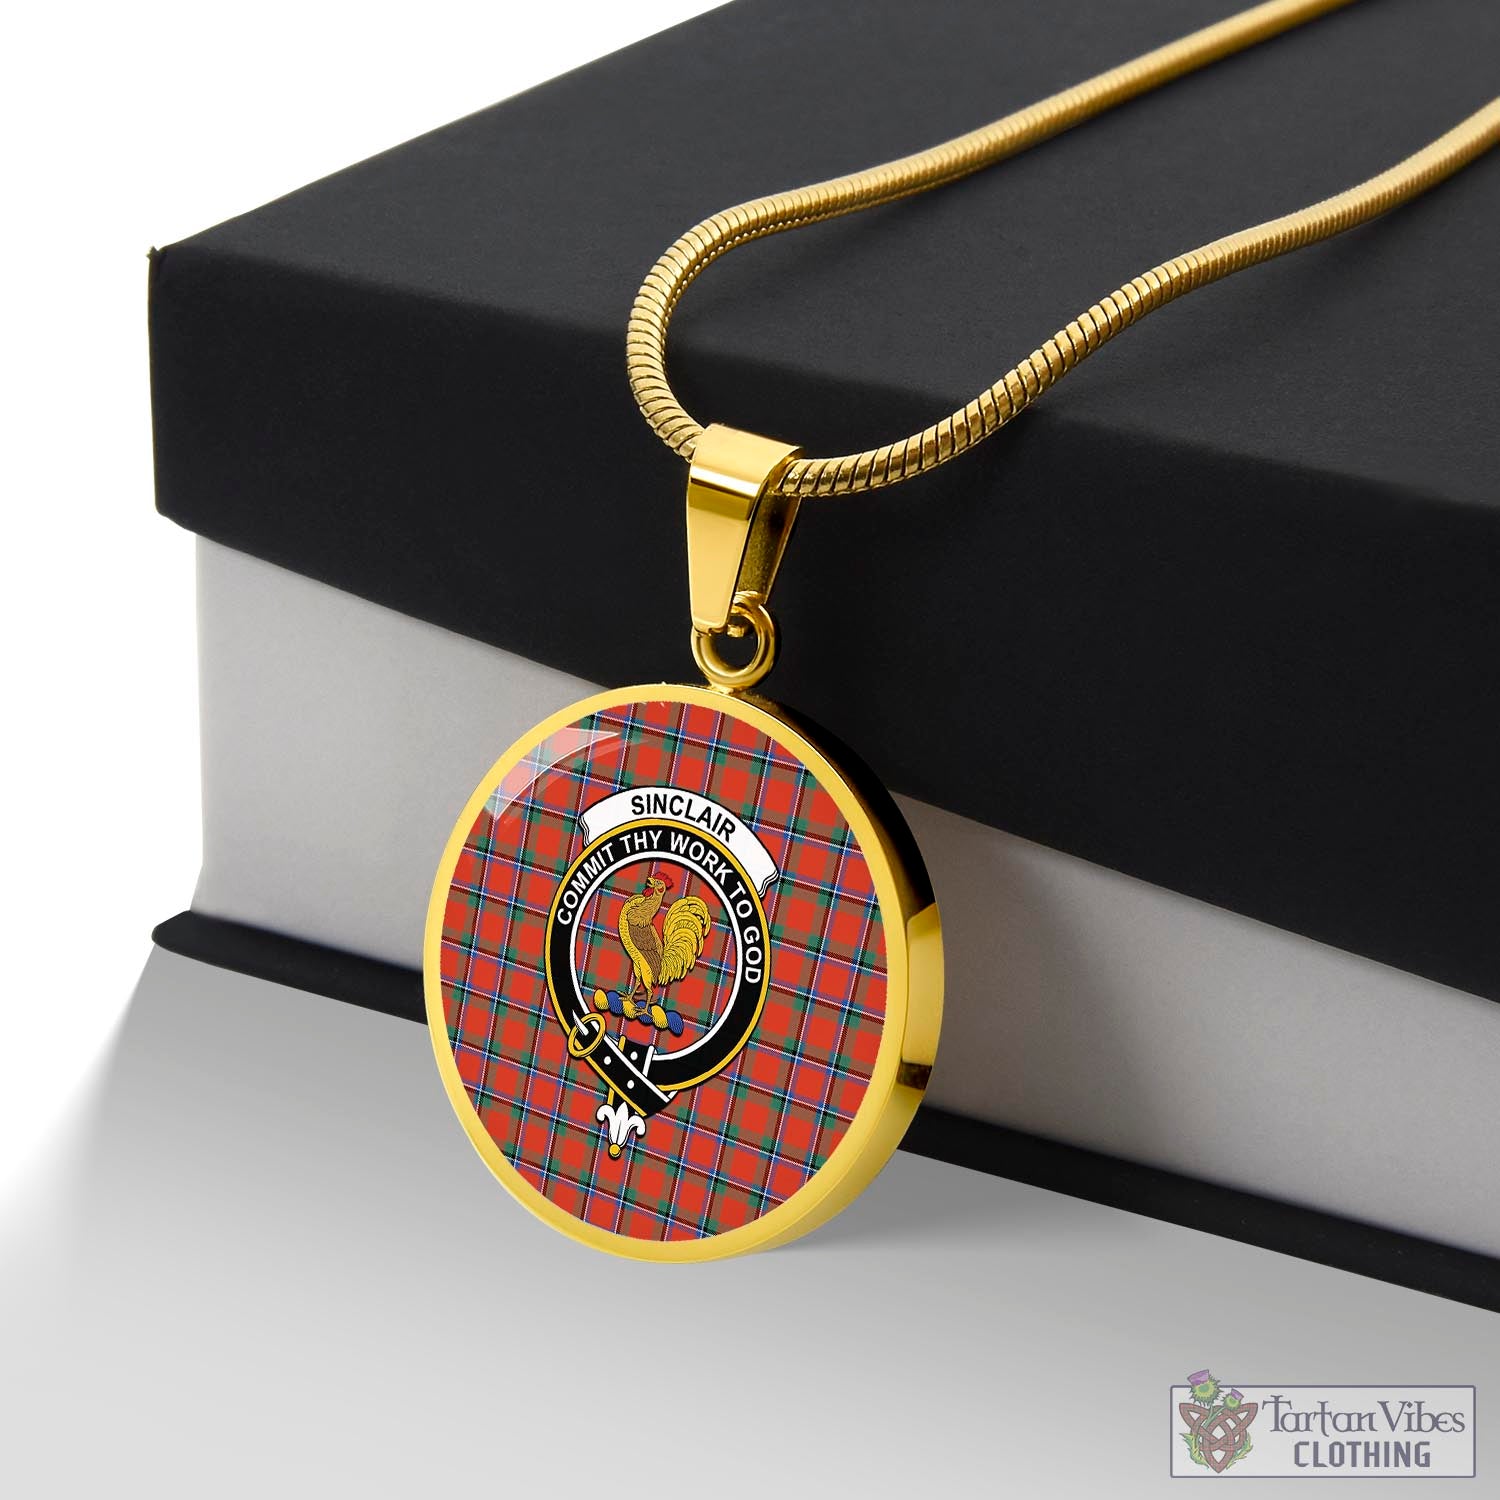 Tartan Vibes Clothing Sinclair Ancient Tartan Circle Necklace with Family Crest